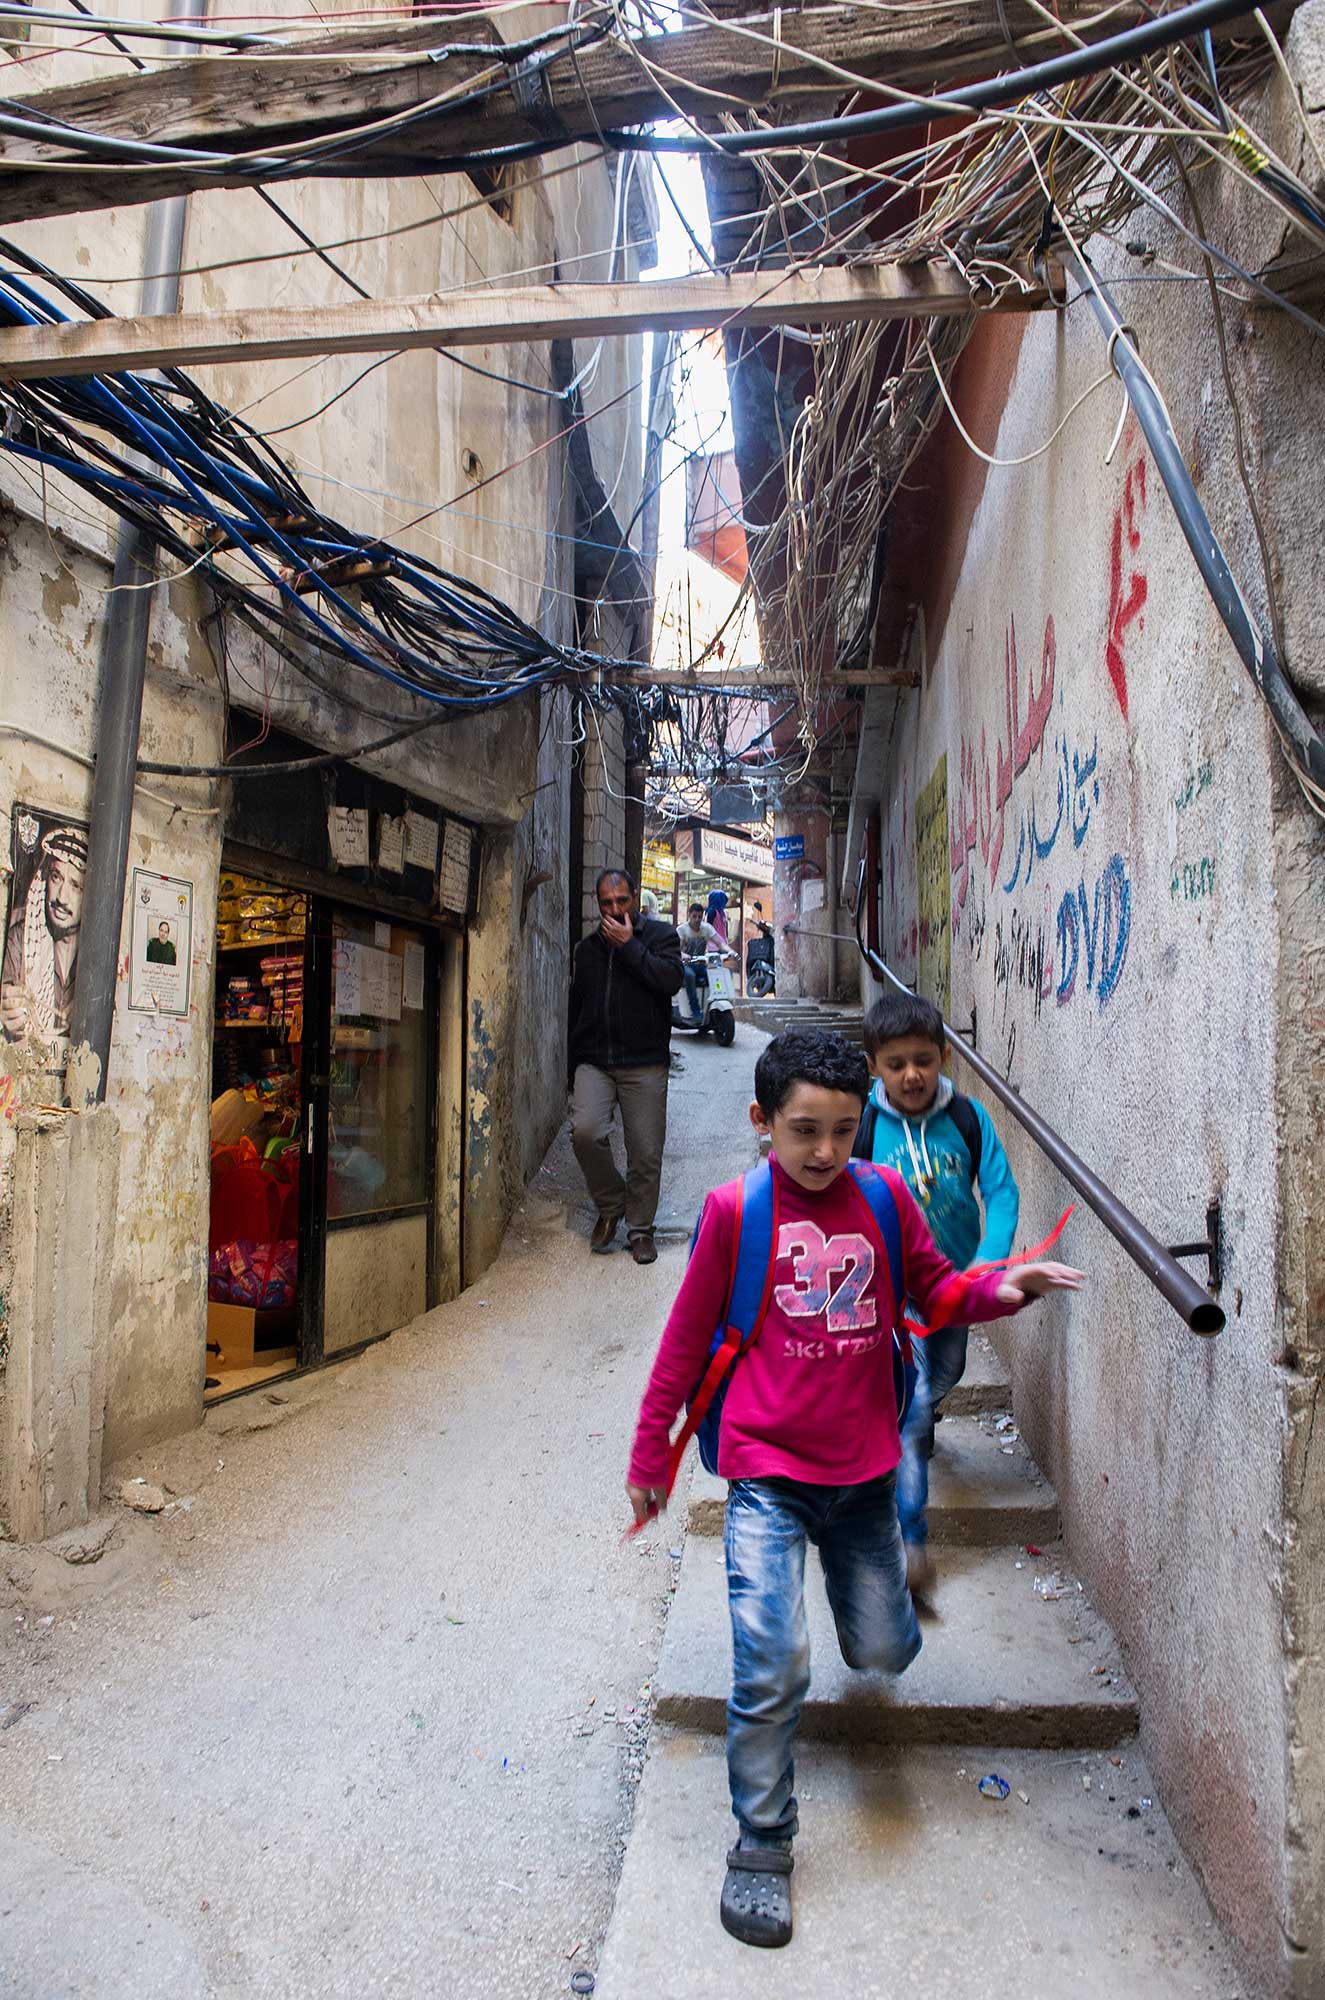 This is a typical “street” in Burj El Barajneh, with unsafe electrical wires exposed.